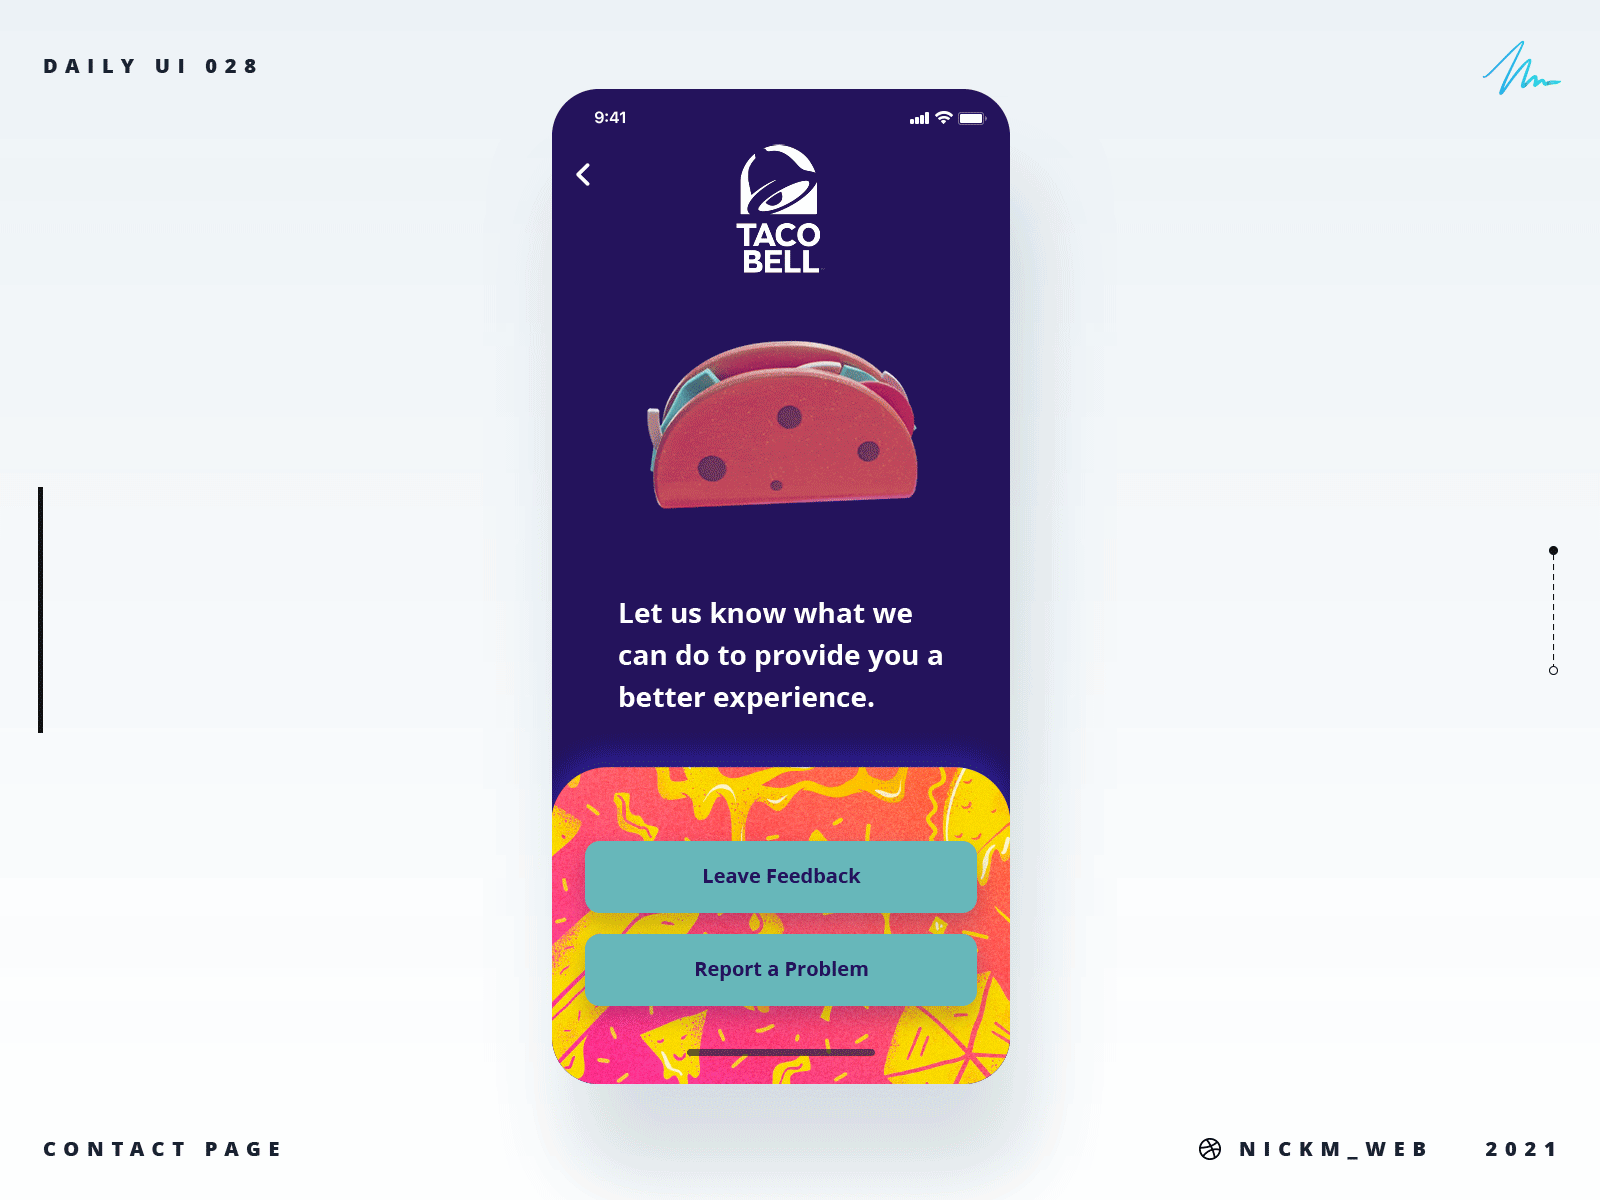 Taco Bell Contact | Daily UI Challenge 028 (Contact Page) 3d 3d animation contact contact page daily daily ui daily ui 028 daily ui challenge dailyui028 dailyuichallenge taco tacos